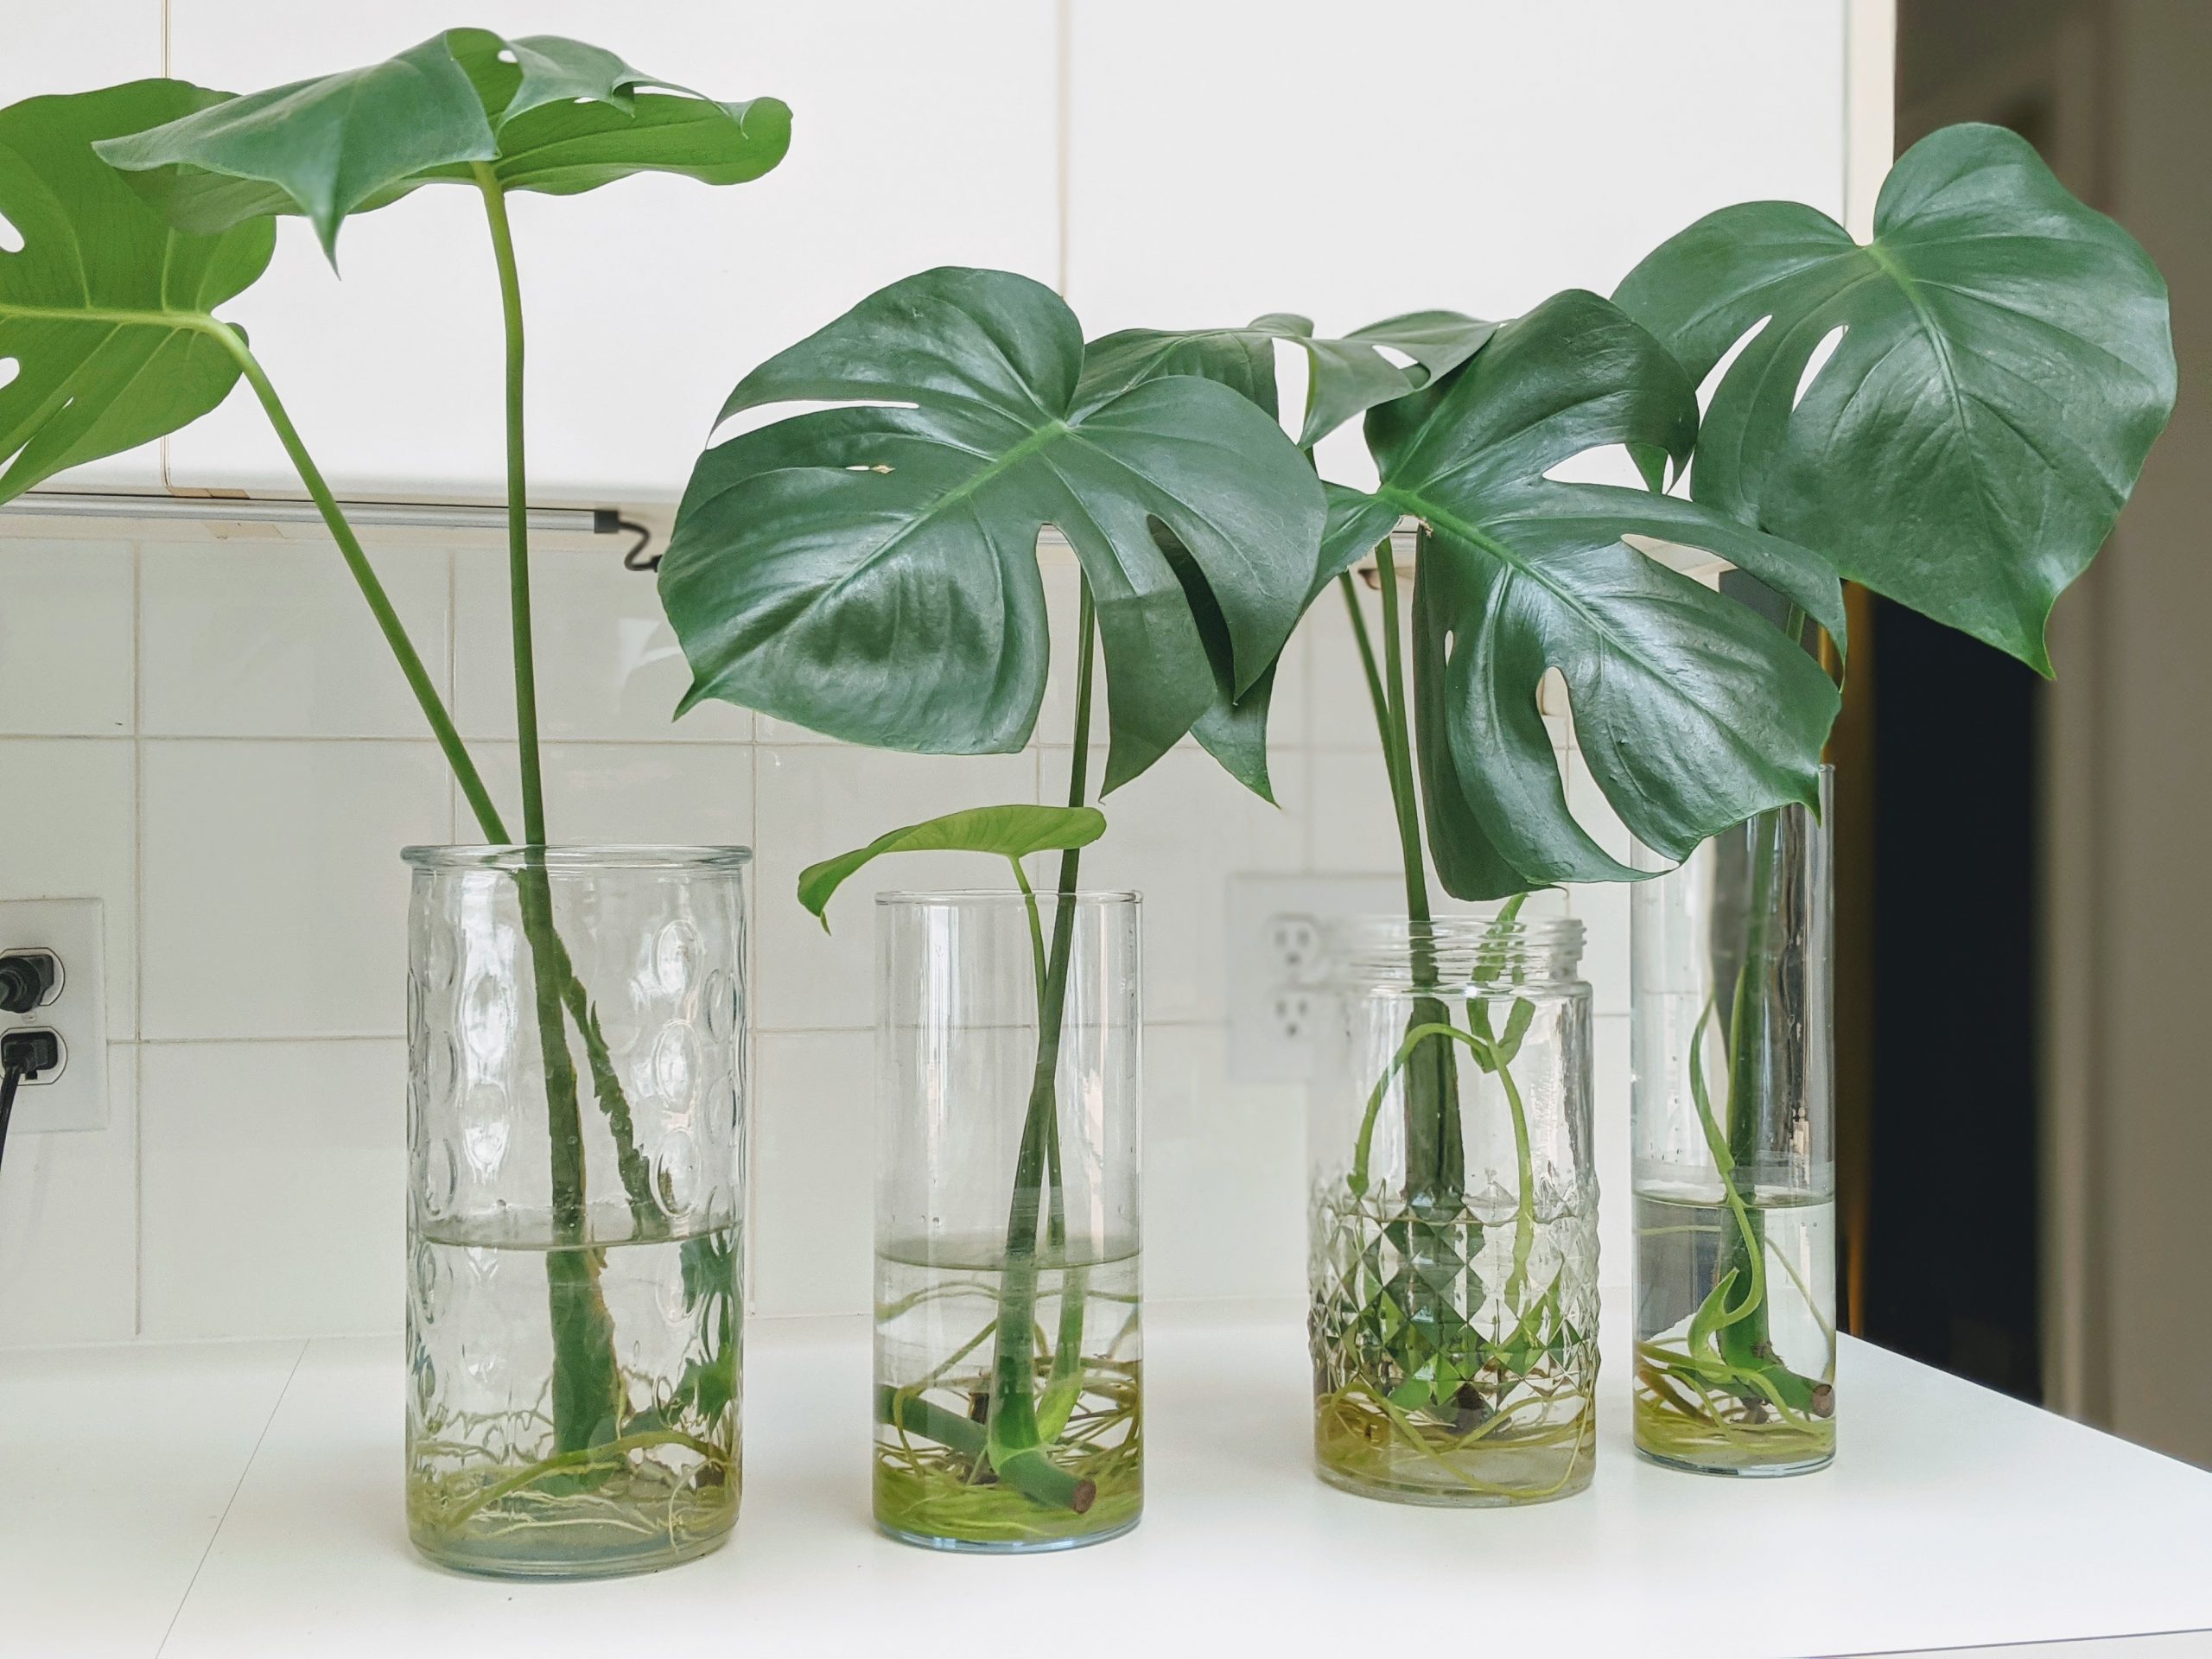 When is the best time to propagate a monstera plant?